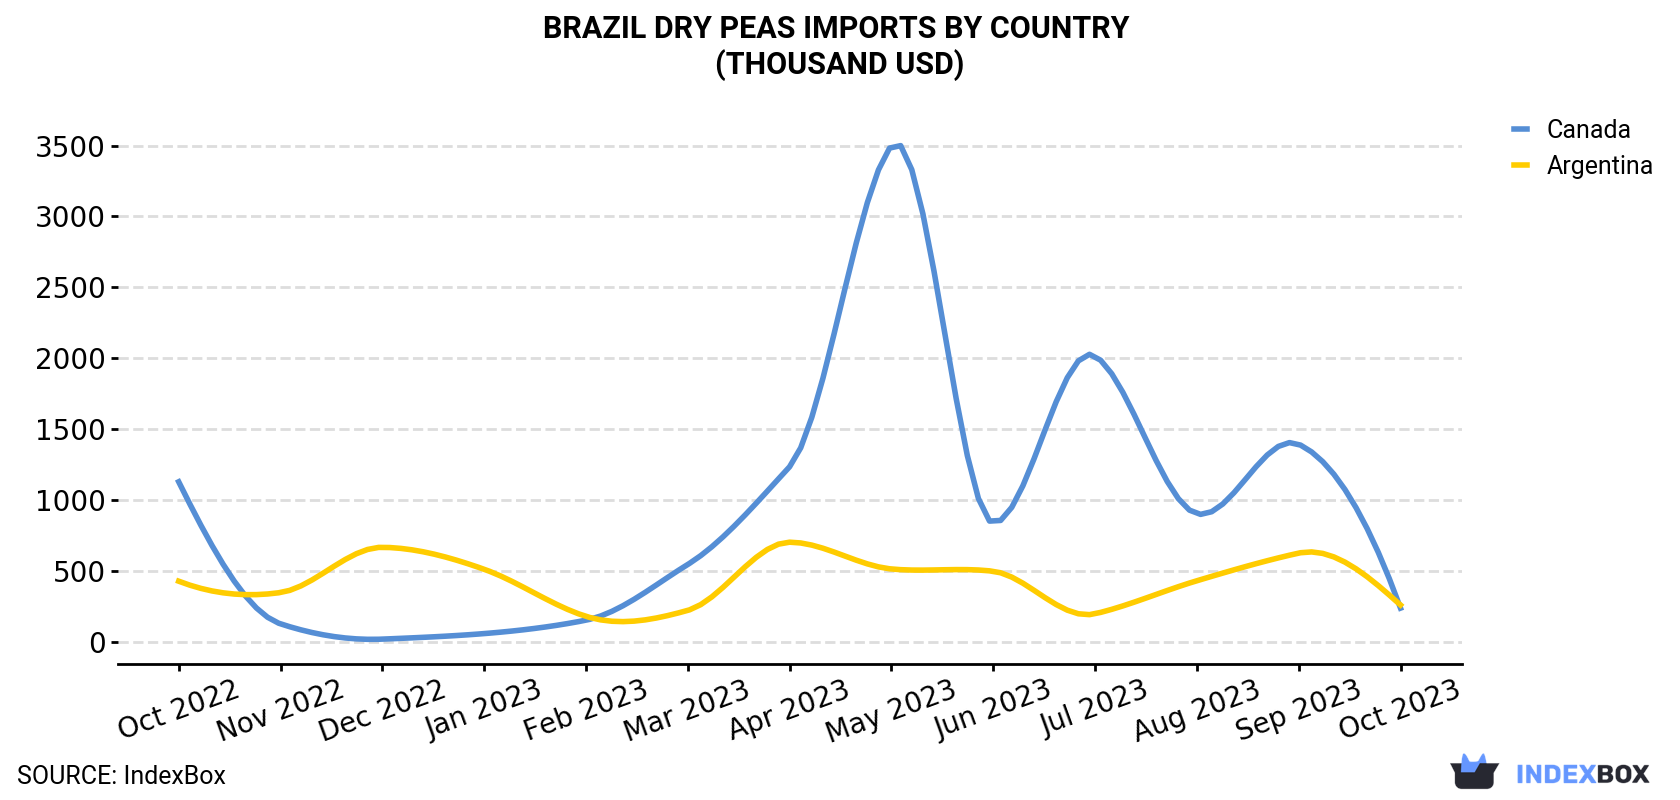 Brazil Dry Peas Imports By Country (Thousand USD)